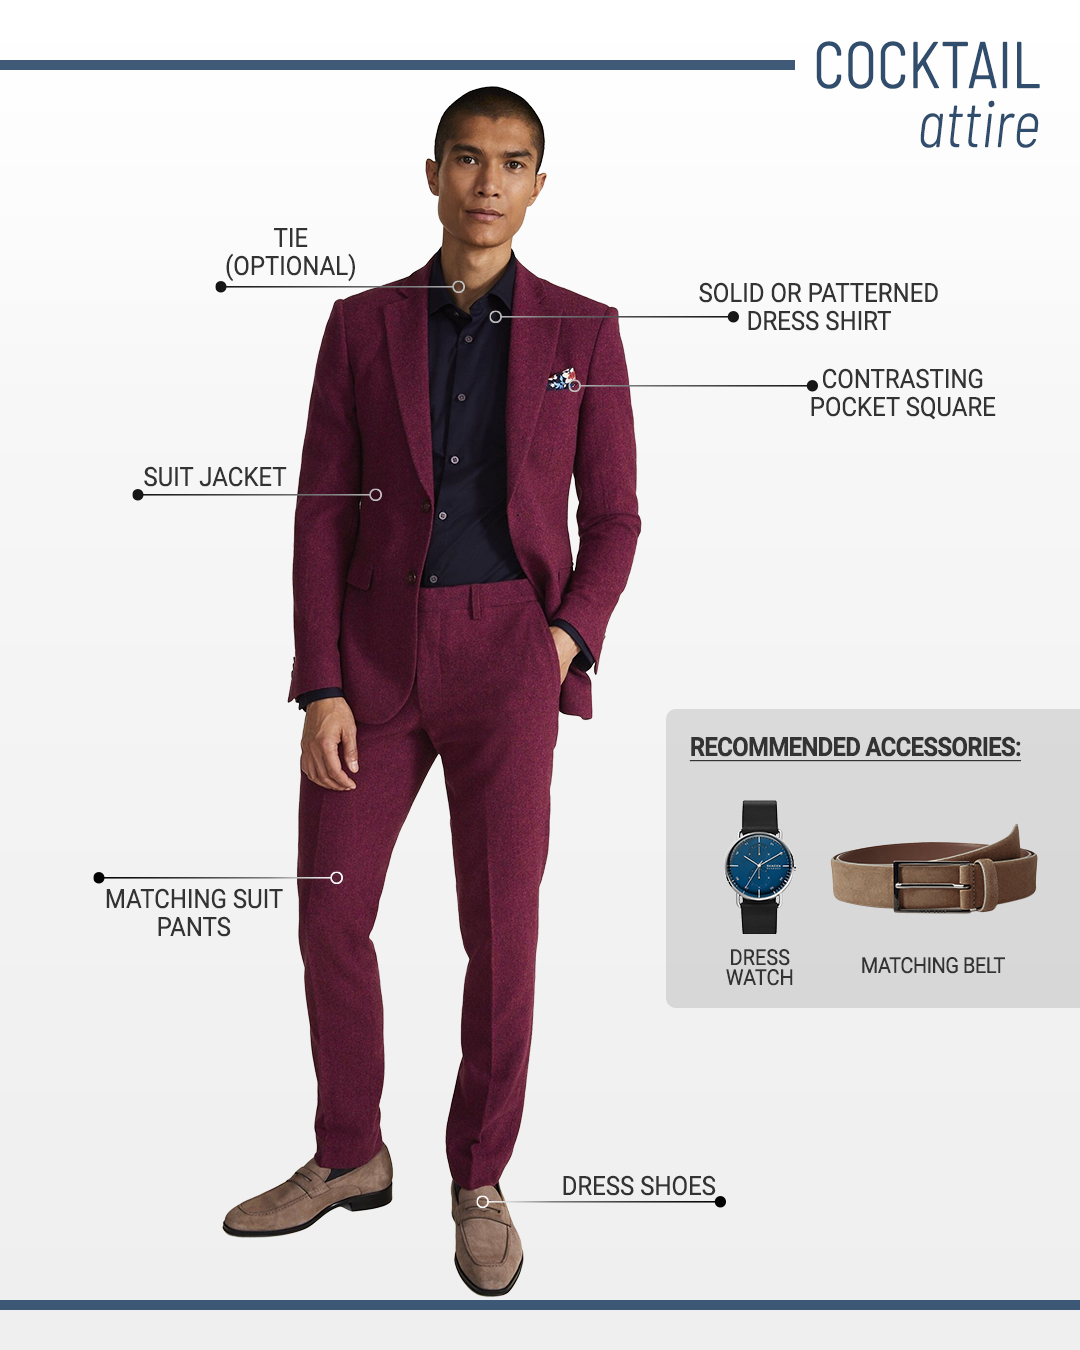 Cocktail dress code and attire for men